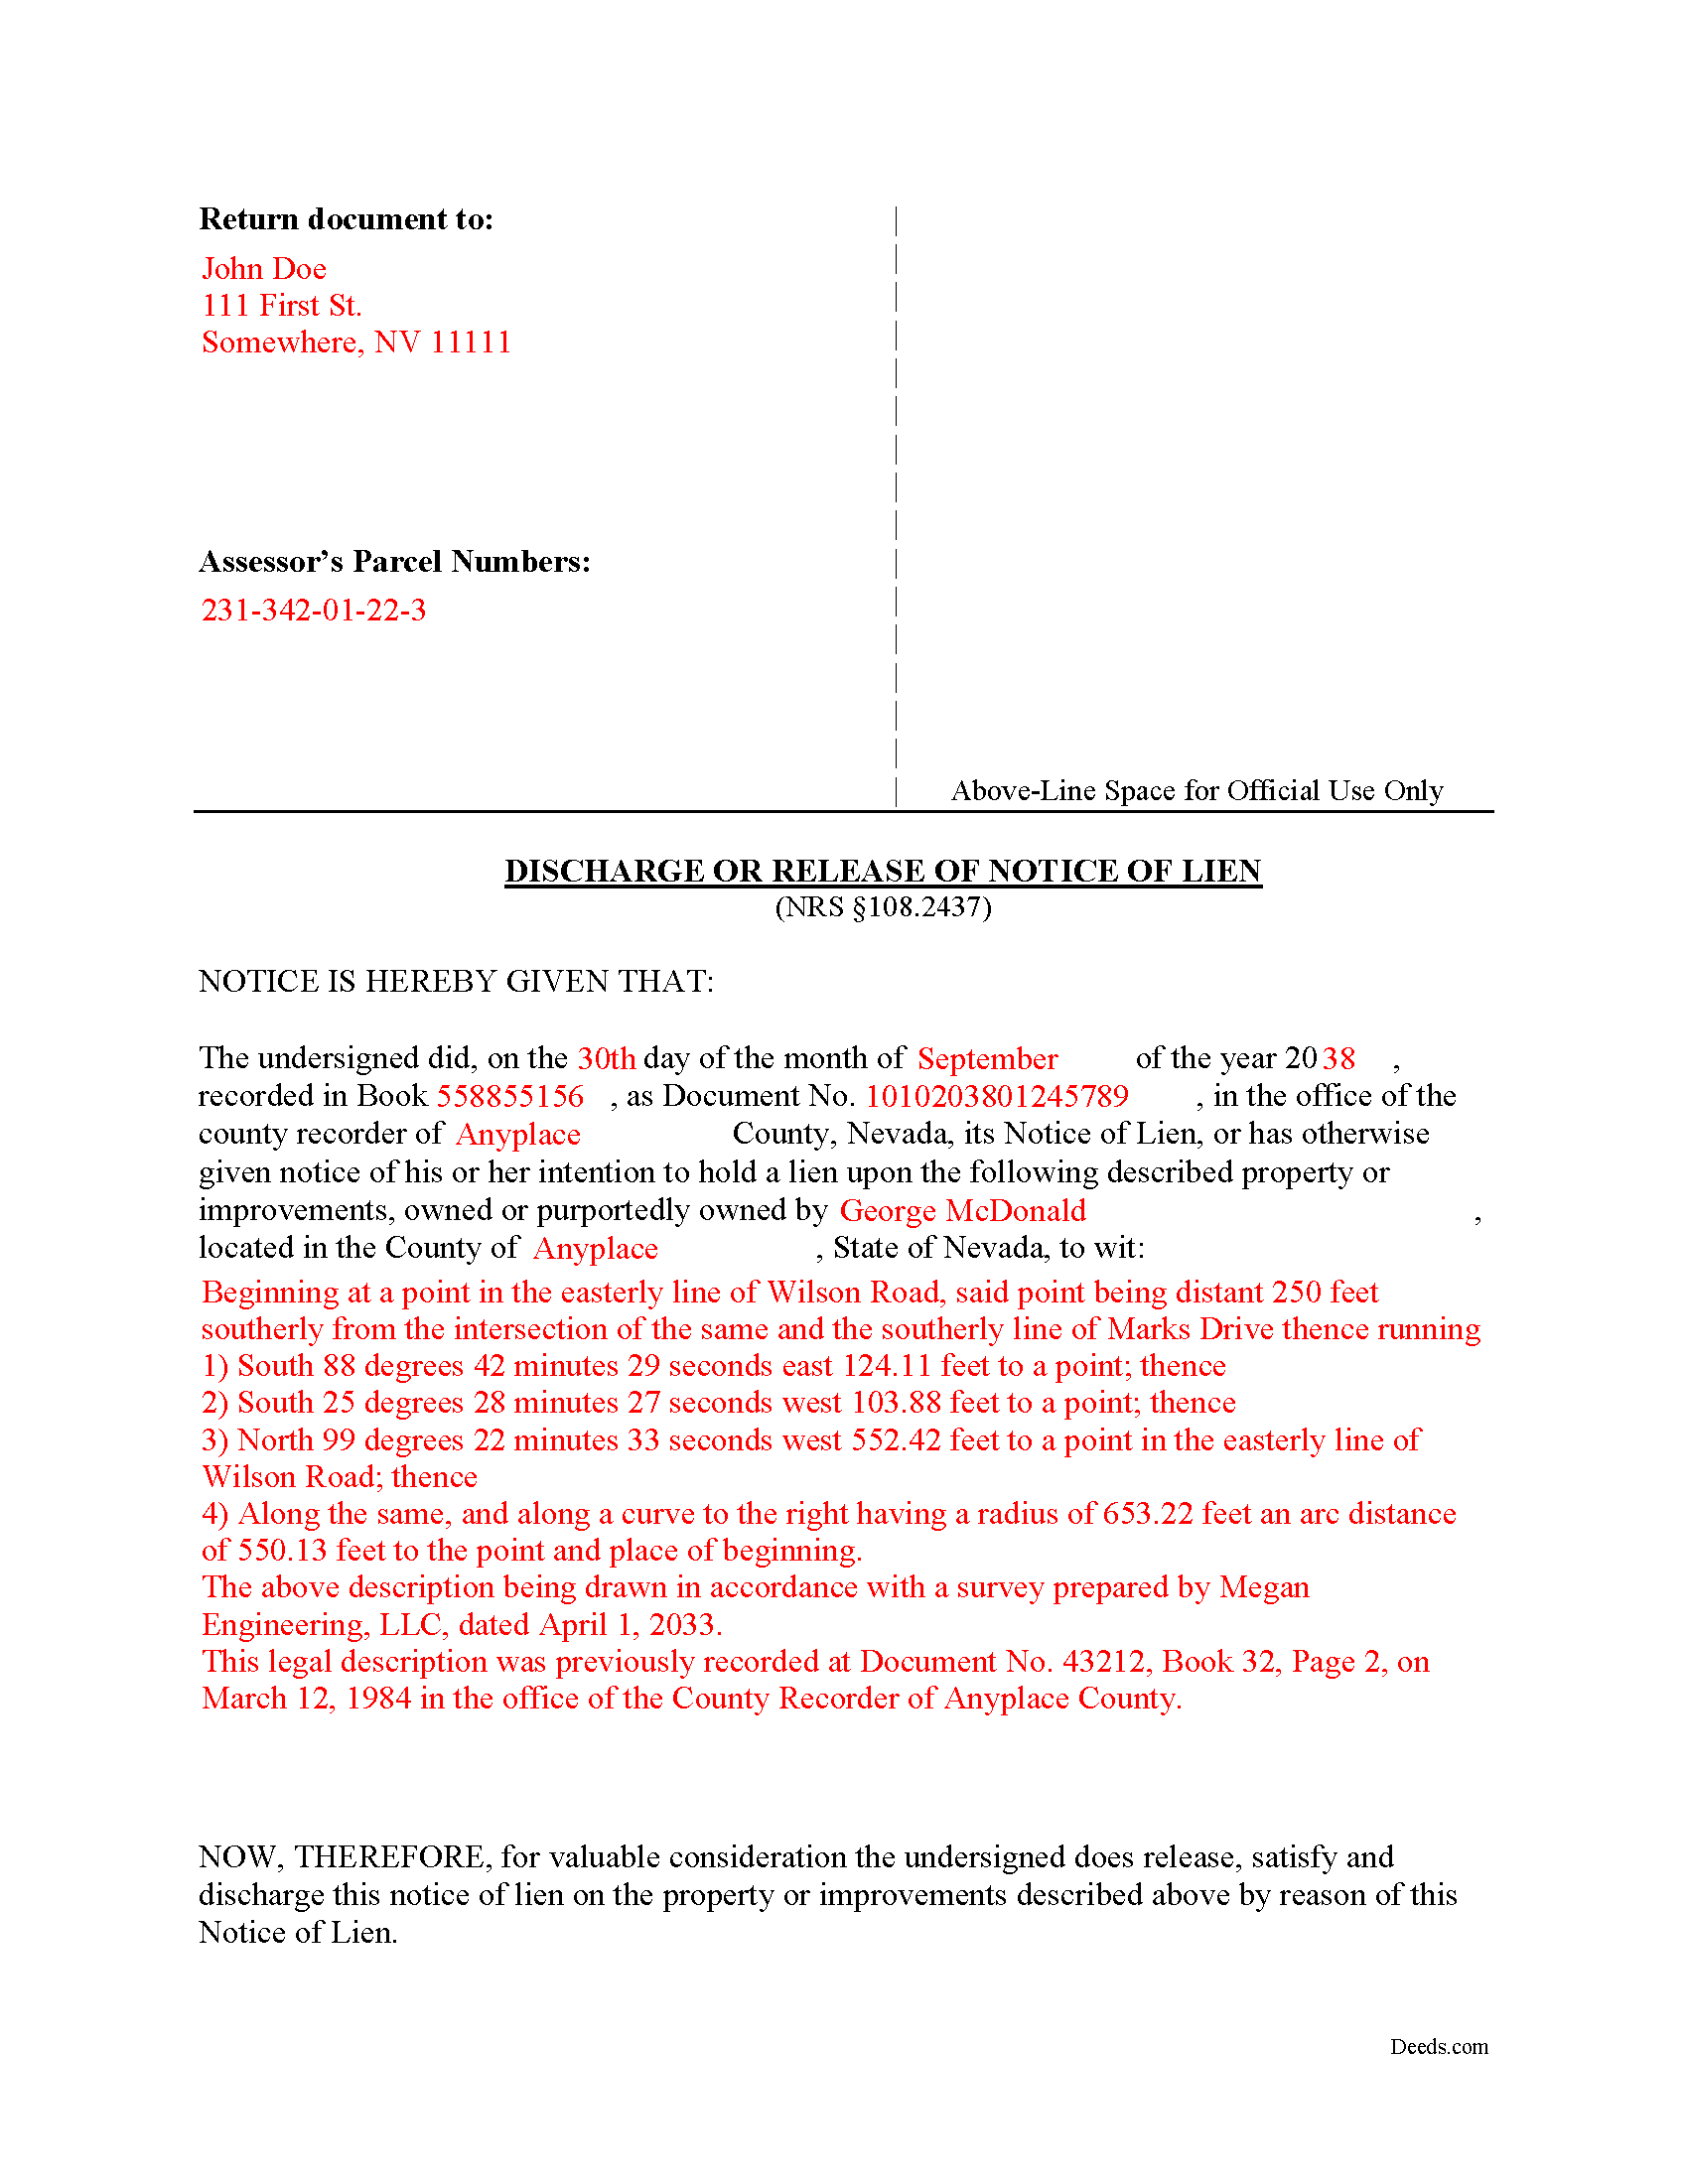 Completed Example of the Discharge of Lien Document